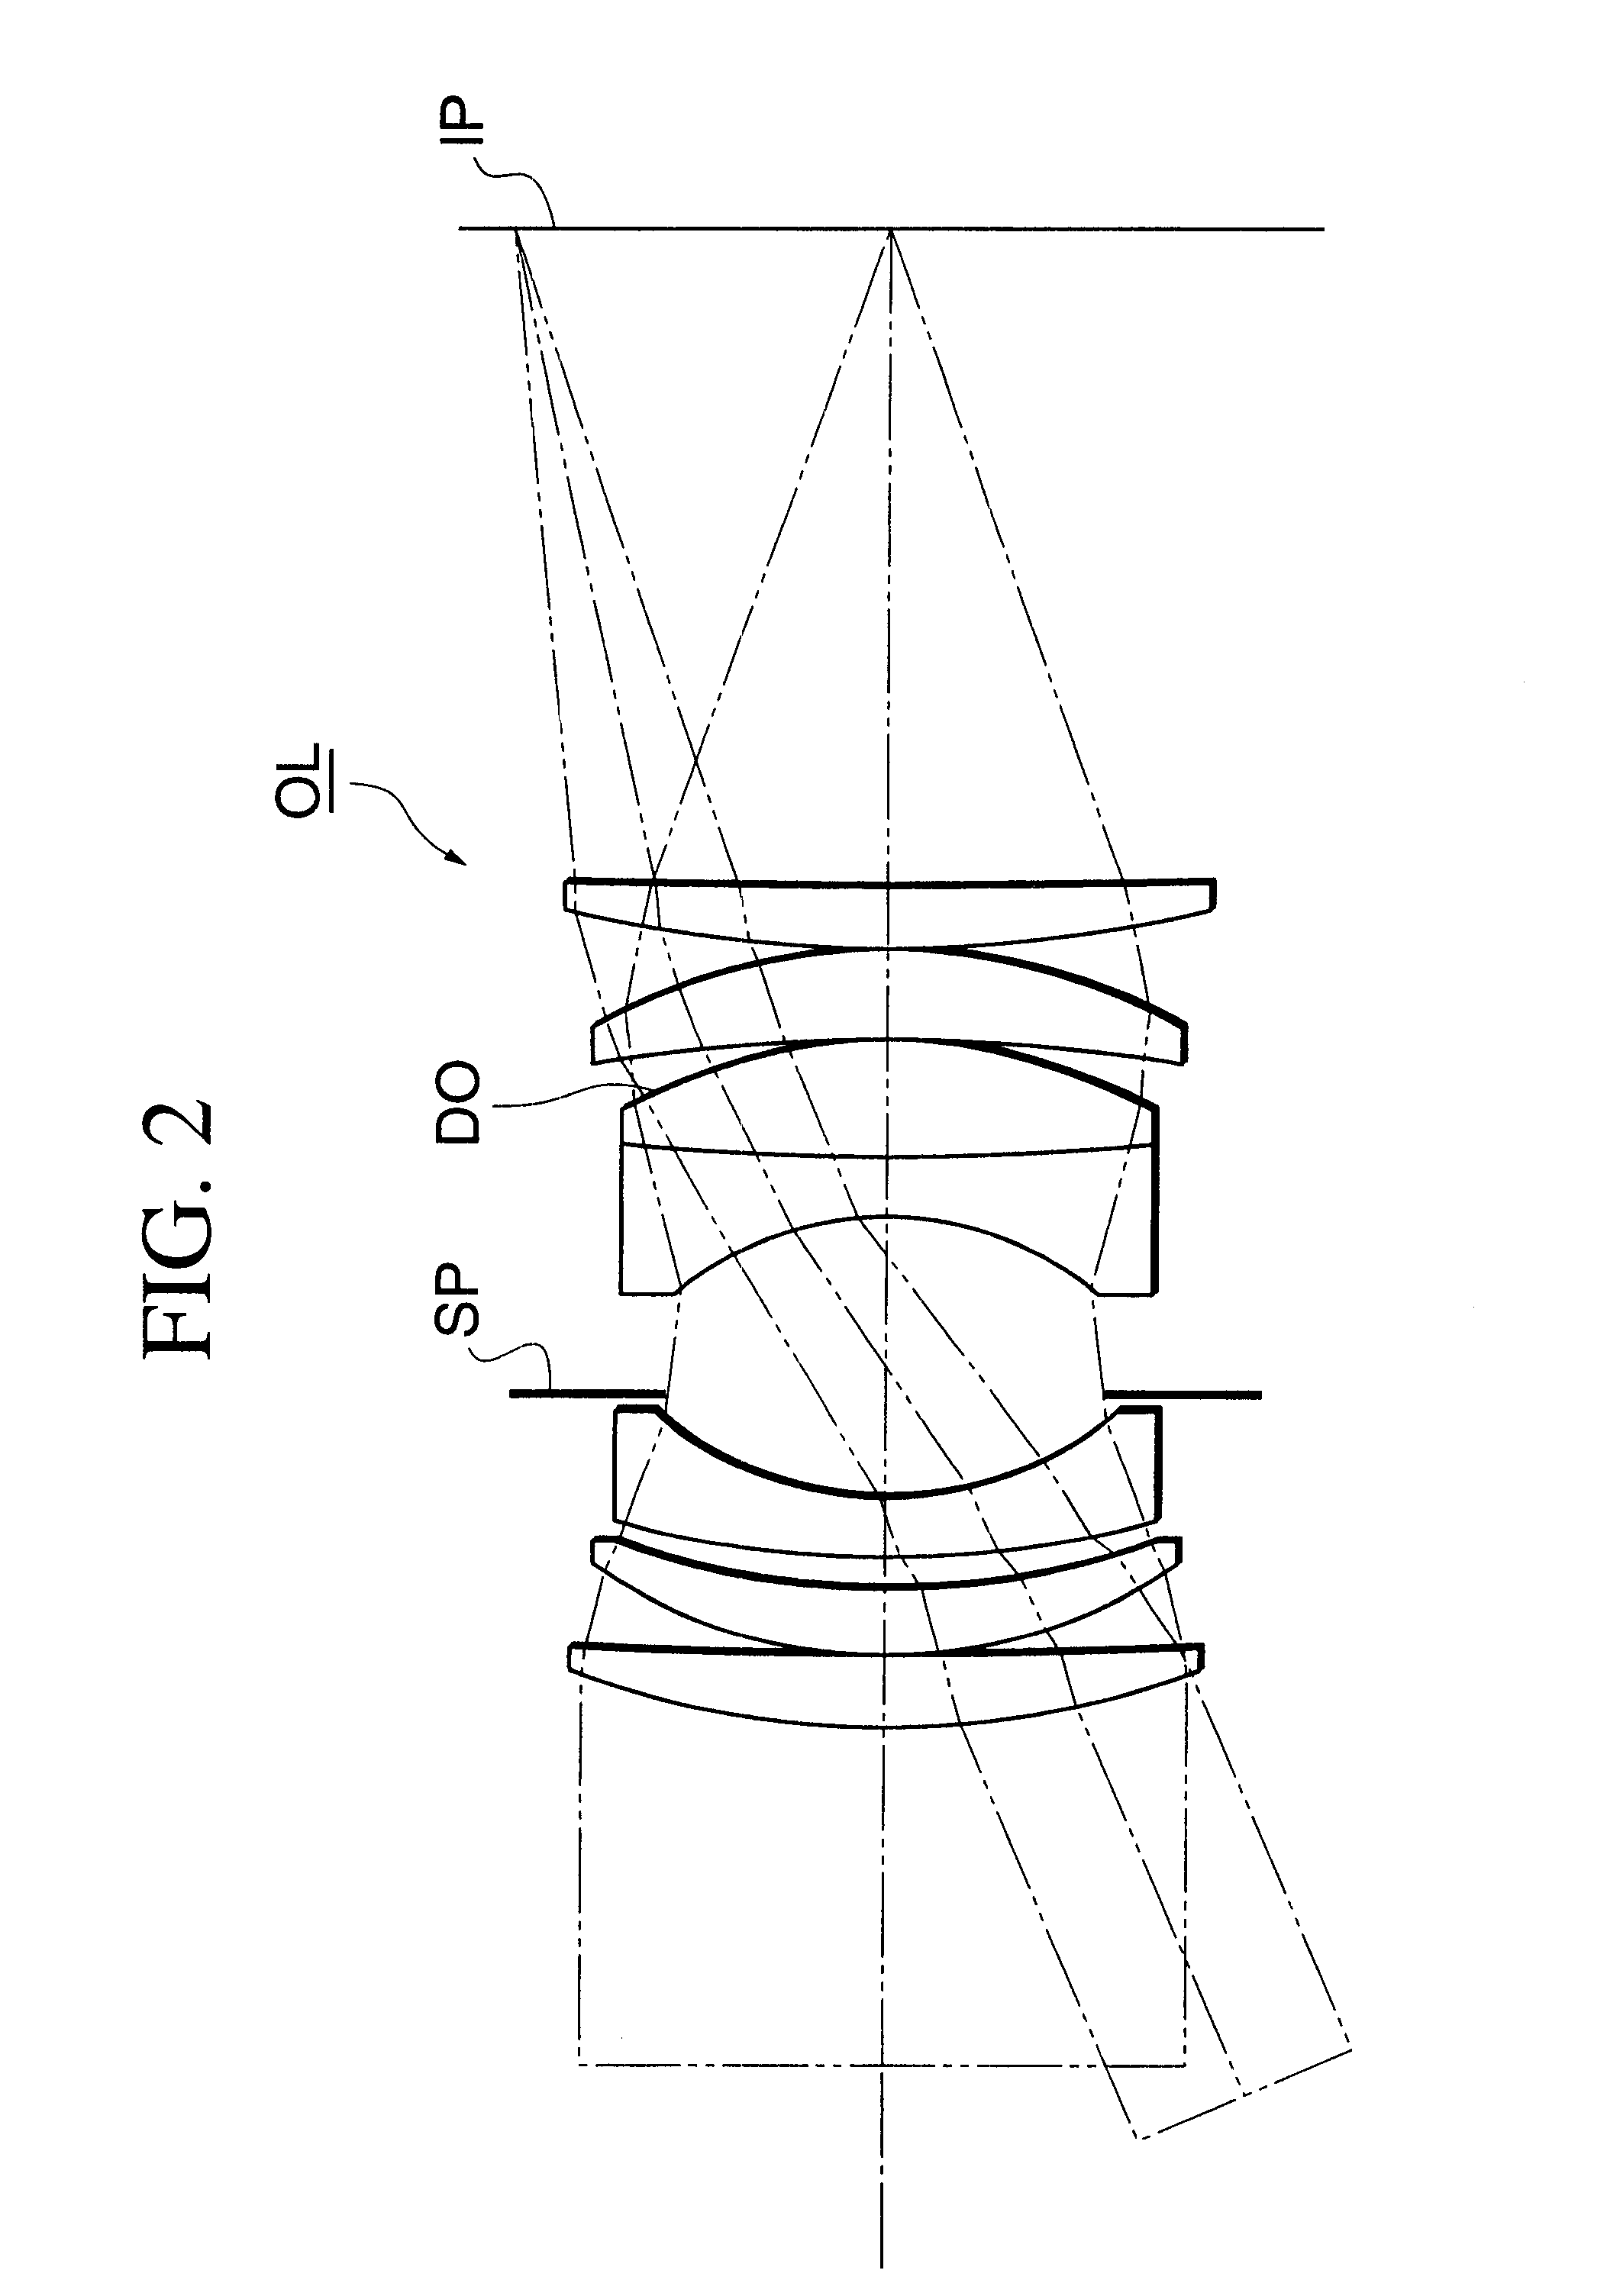 Optical system having a diffractive optical element, and optical apparatus